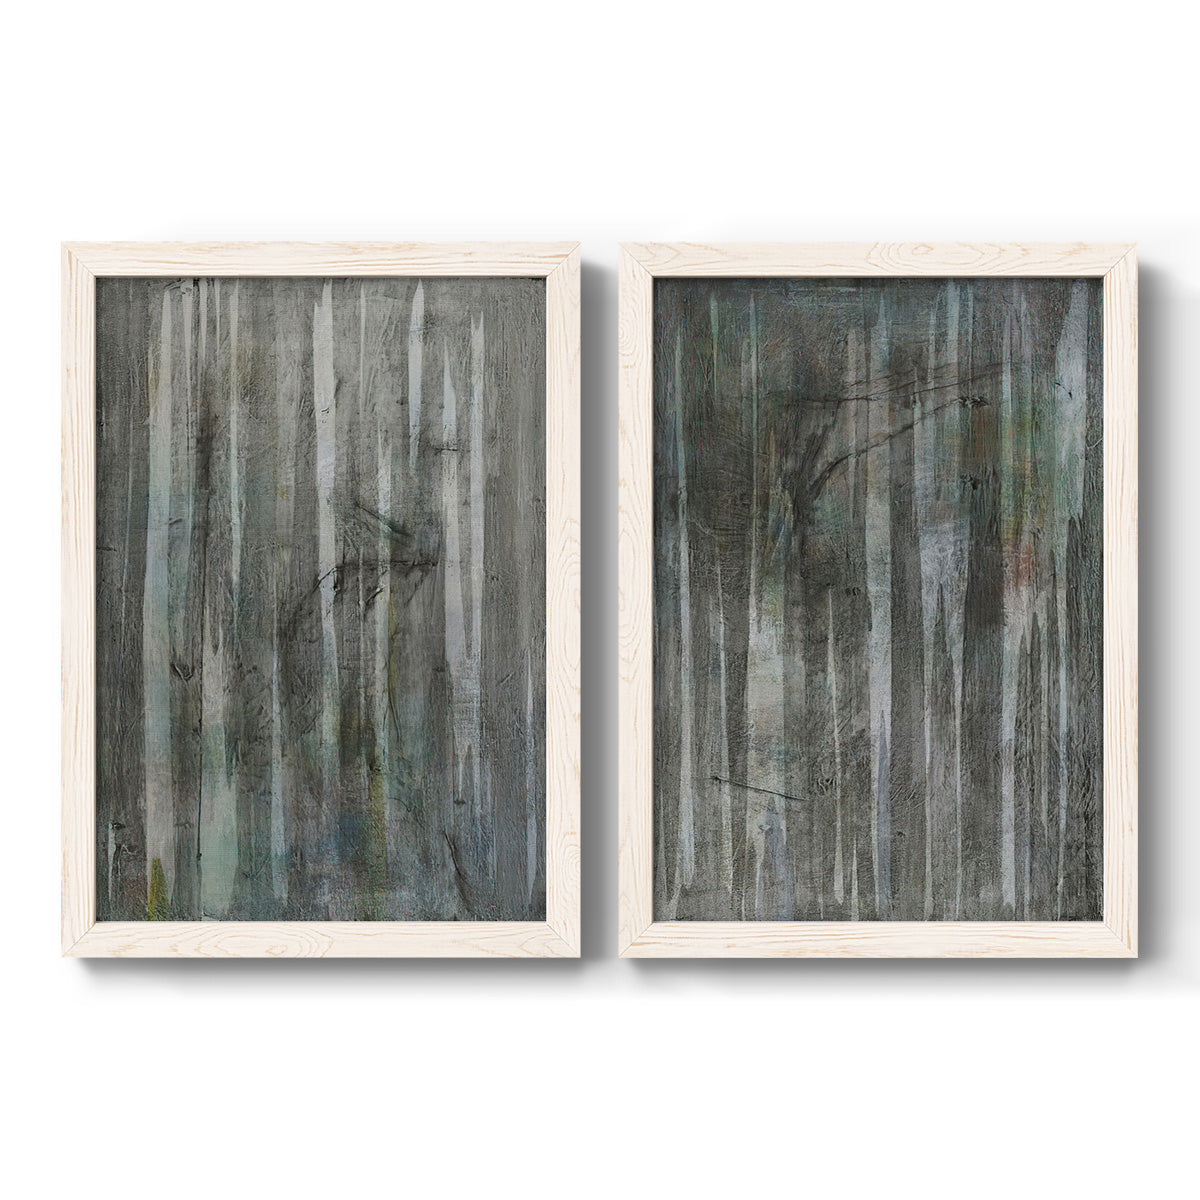 Birch Forest Abstracts I - Premium Framed Canvas 2 Piece Set - Ready to Hang